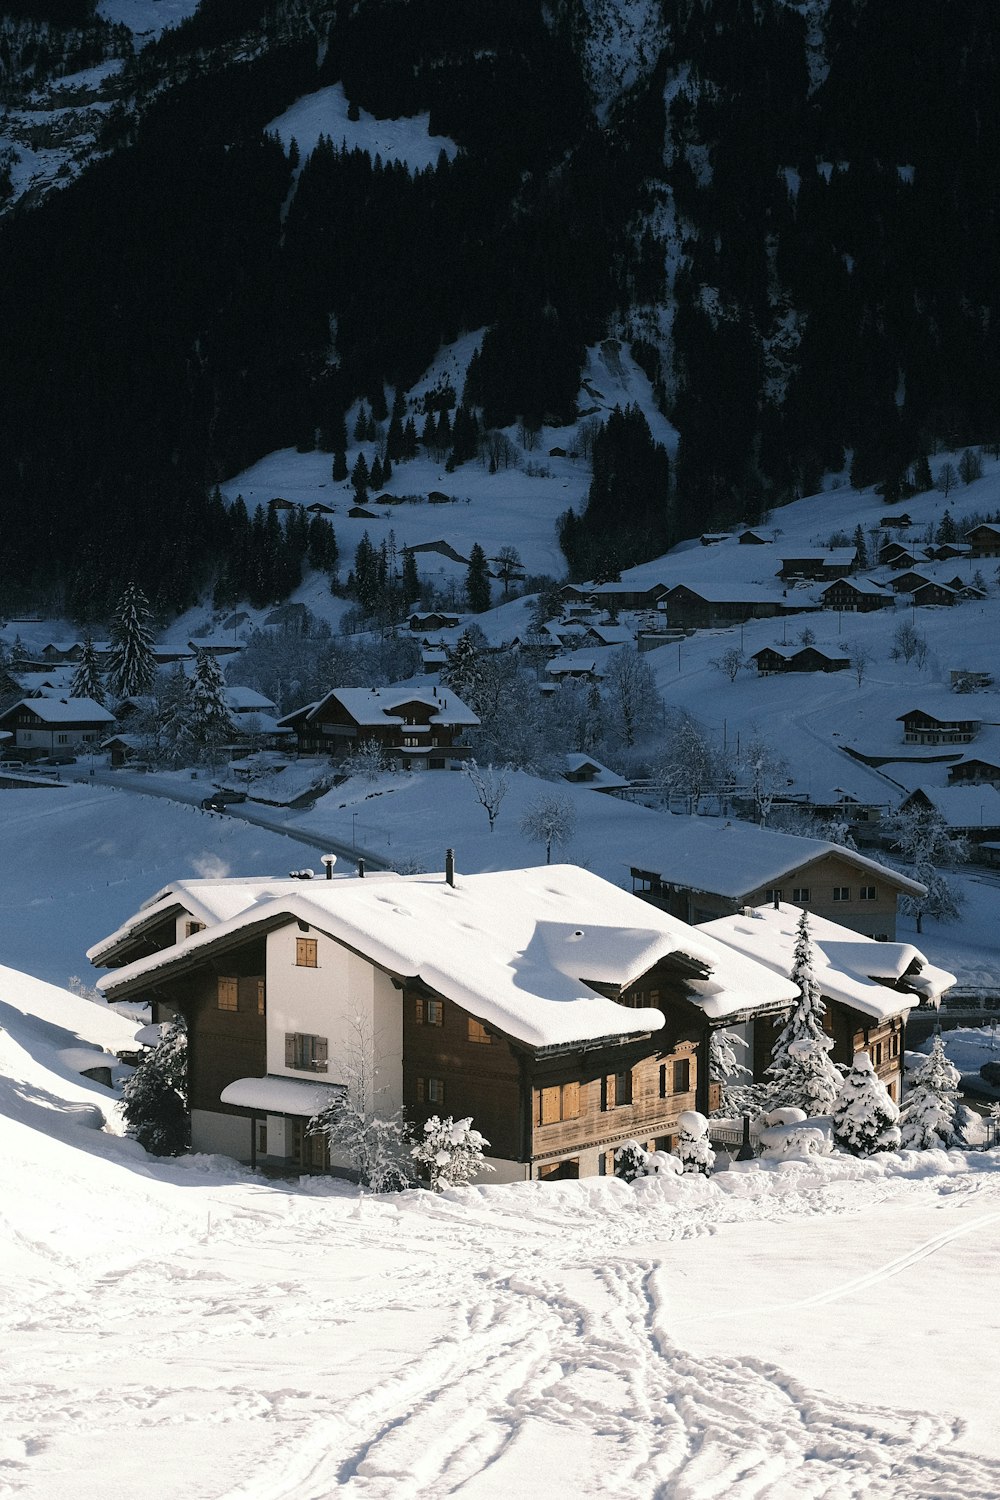 a snow covered ski slope with houses in the background